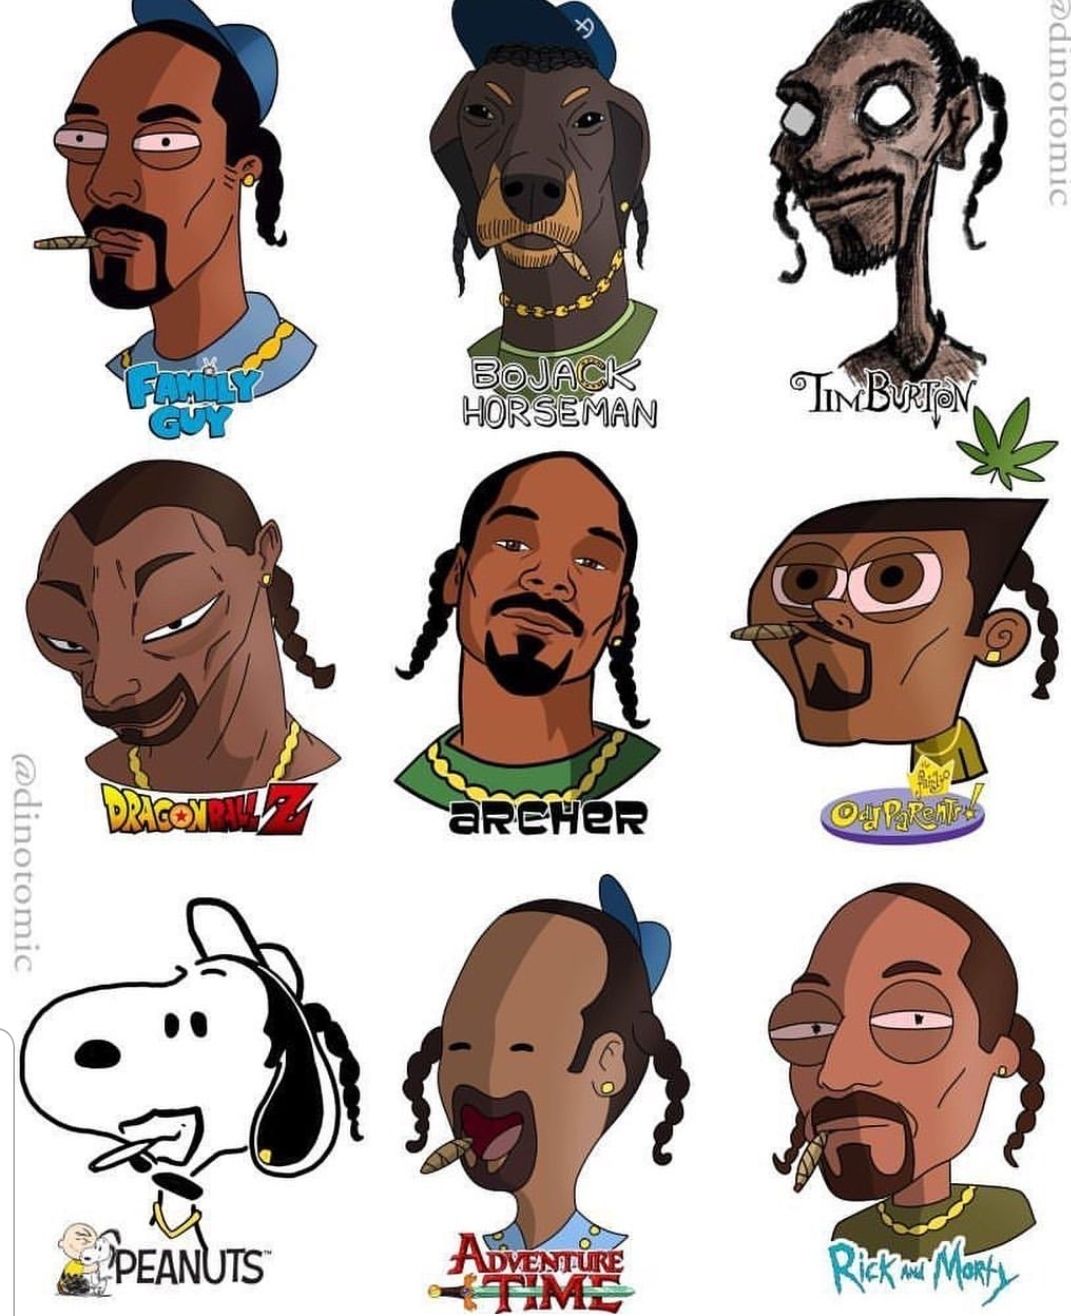 Snoop Dog in shows